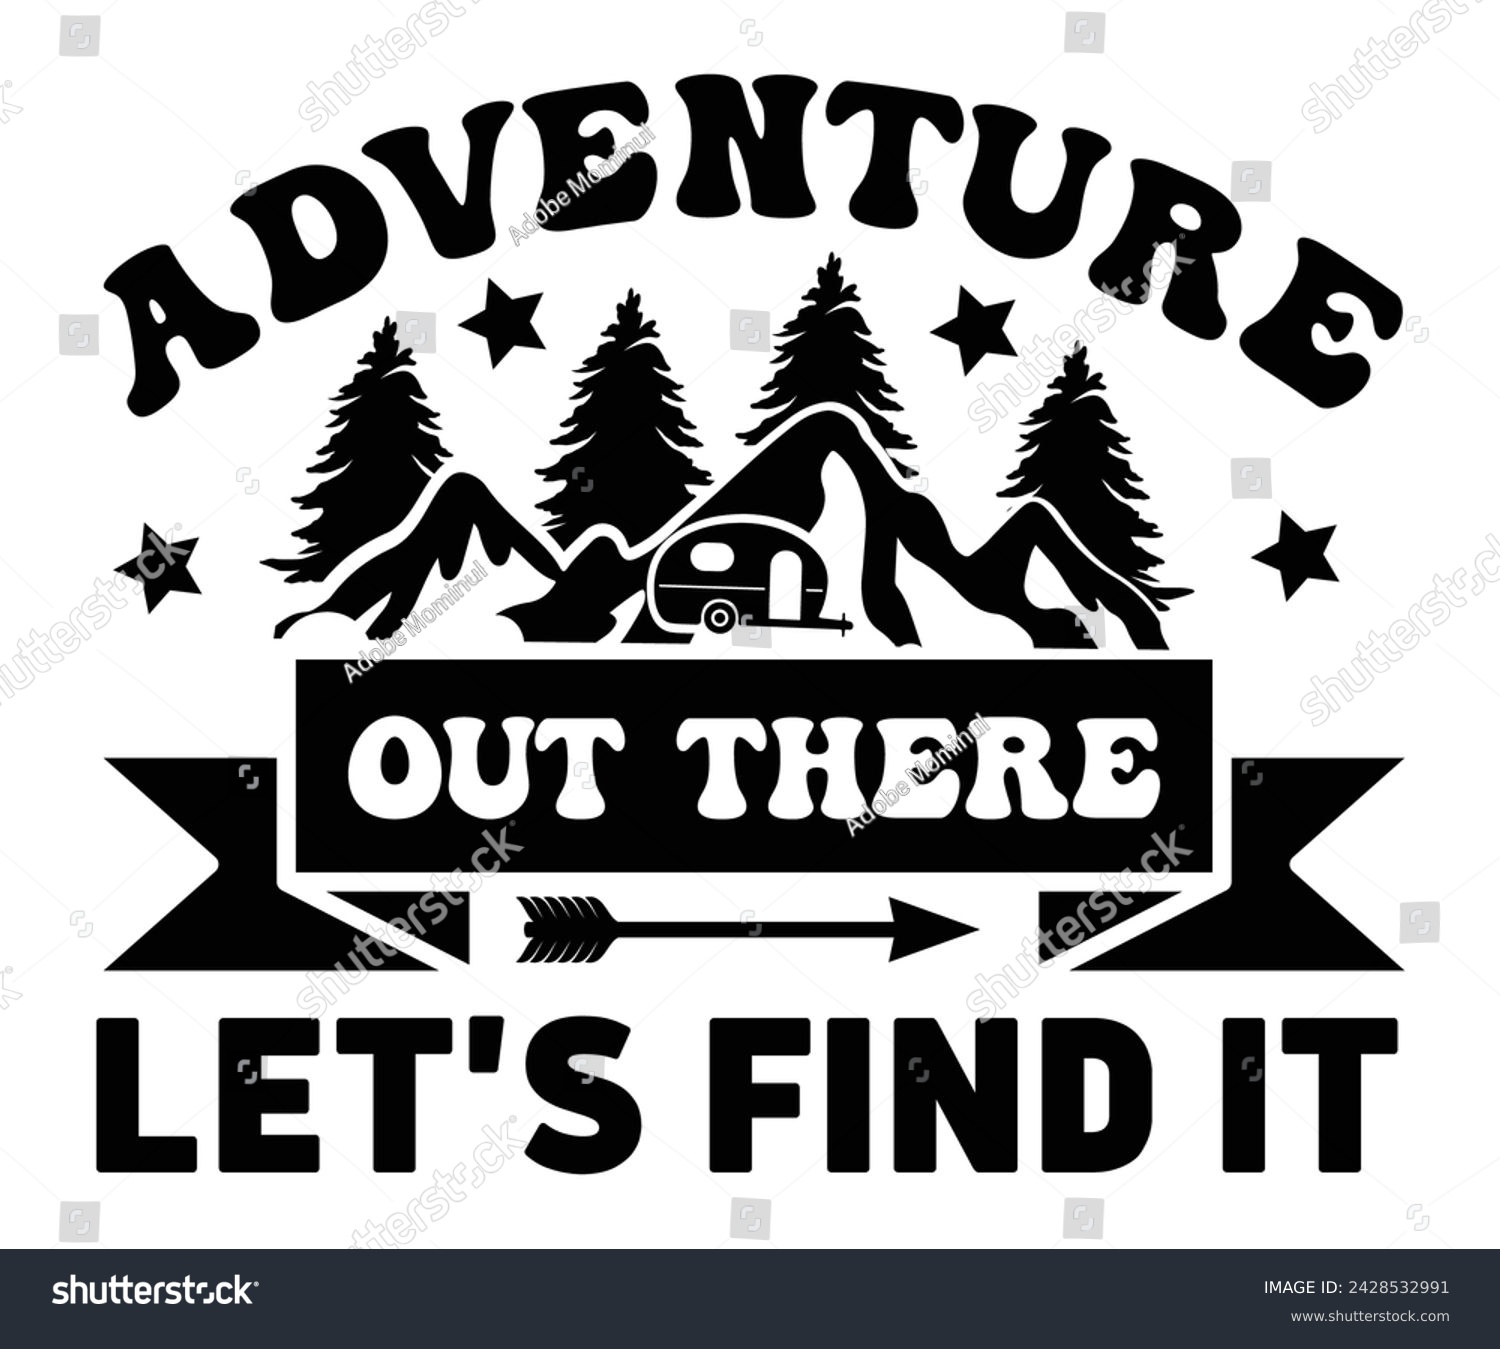 SVG of Adventure Out There Let's Find it Svg,Happy Camper Svg,Camping Svg,Adventure Svg,Hiking Svg,Camp Saying,Camp Life Svg,Svg Cut Files, Png,Mountain T-shirt,Instant Download svg